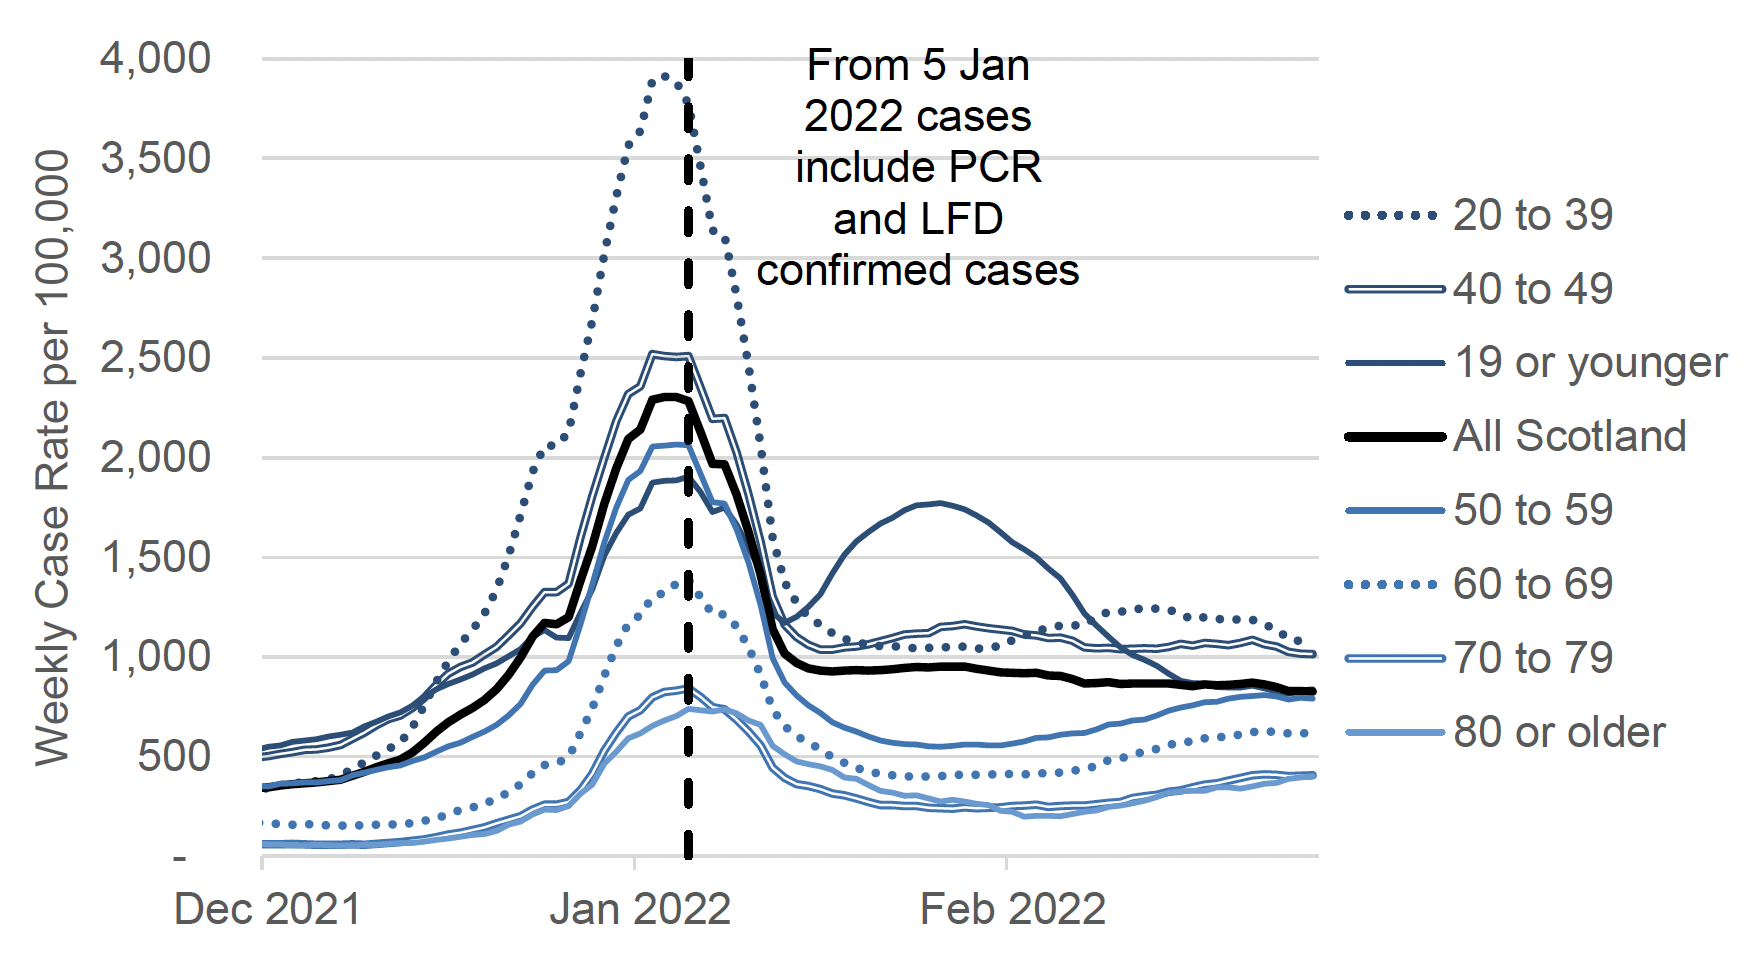 a line graph showing the weekly total combined PCR and LFD case rate (including reinfections) by specimen date per 100,000 people by age group, from December 2021 to February 2022. All age groups saw a peak in weekly case rates in early January, after which cases levelled off for all age groups apart from those aged under 20. The case rate in this age group have since decreased. The chart has a note that says: “from 5 January 2022 cases include PCR and LFD confirmed cases”. Before 5 January 2022, the case rate includes only PCR confirmed cases.